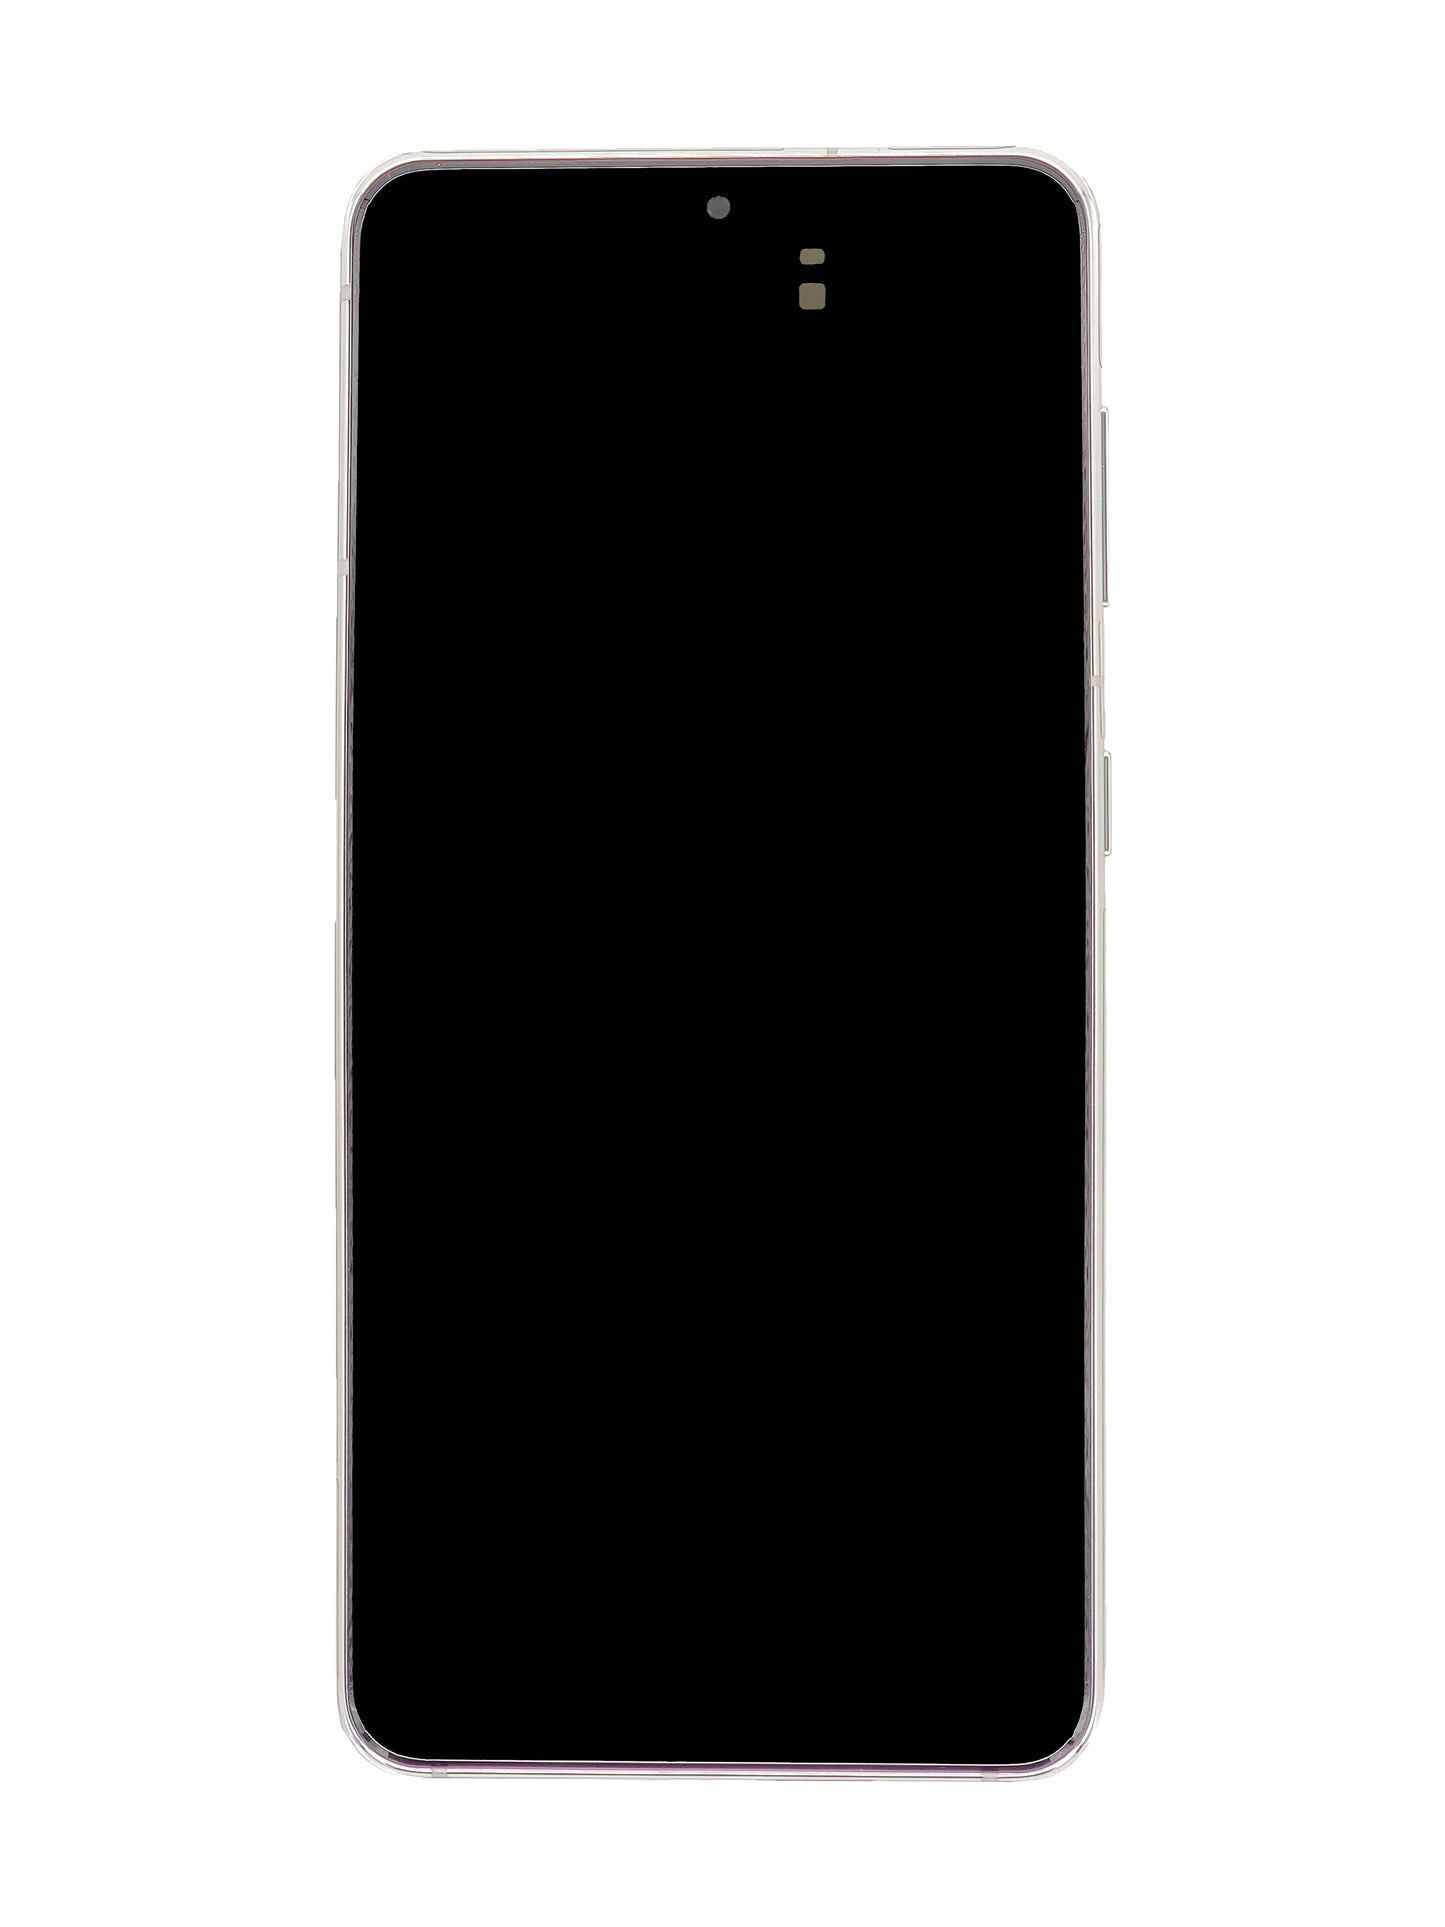 SGS S21 (5G) Screen Assembly (With The Frame) (Refurbished) (Phantom White)